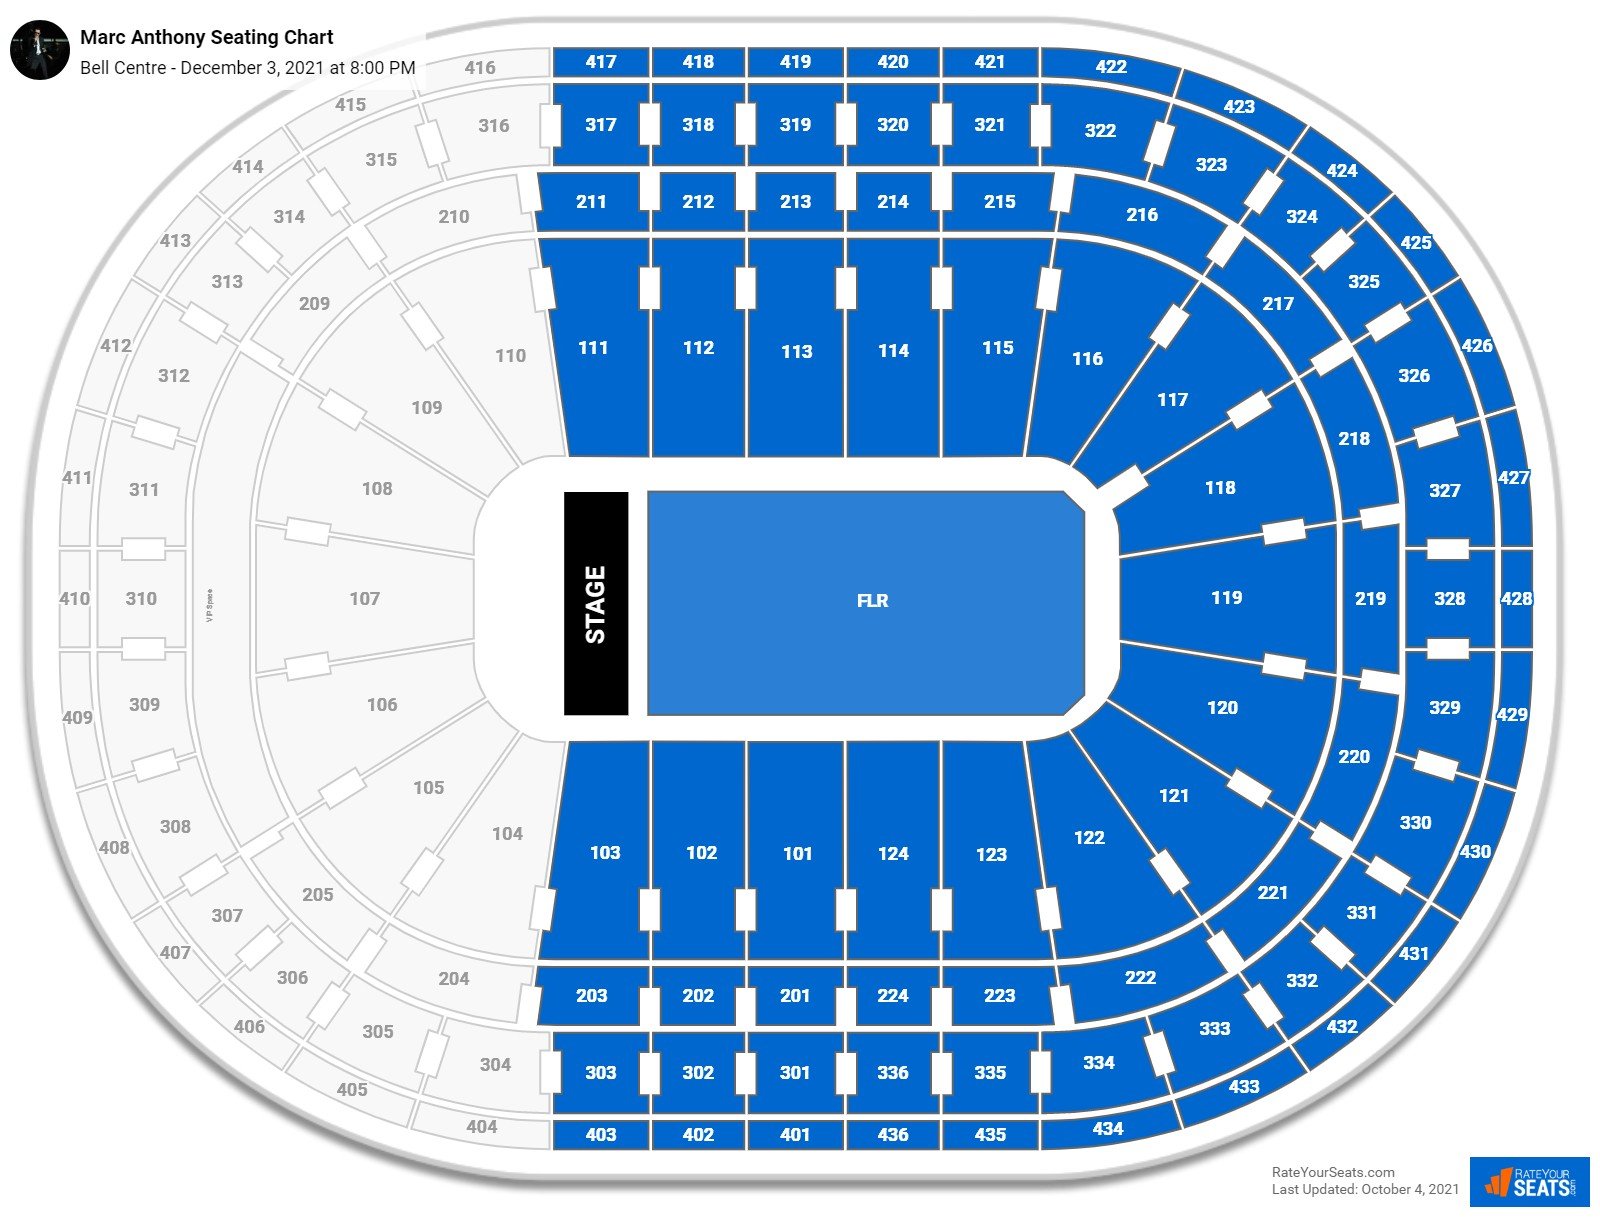 Bell Centre Seating Charts for Concerts